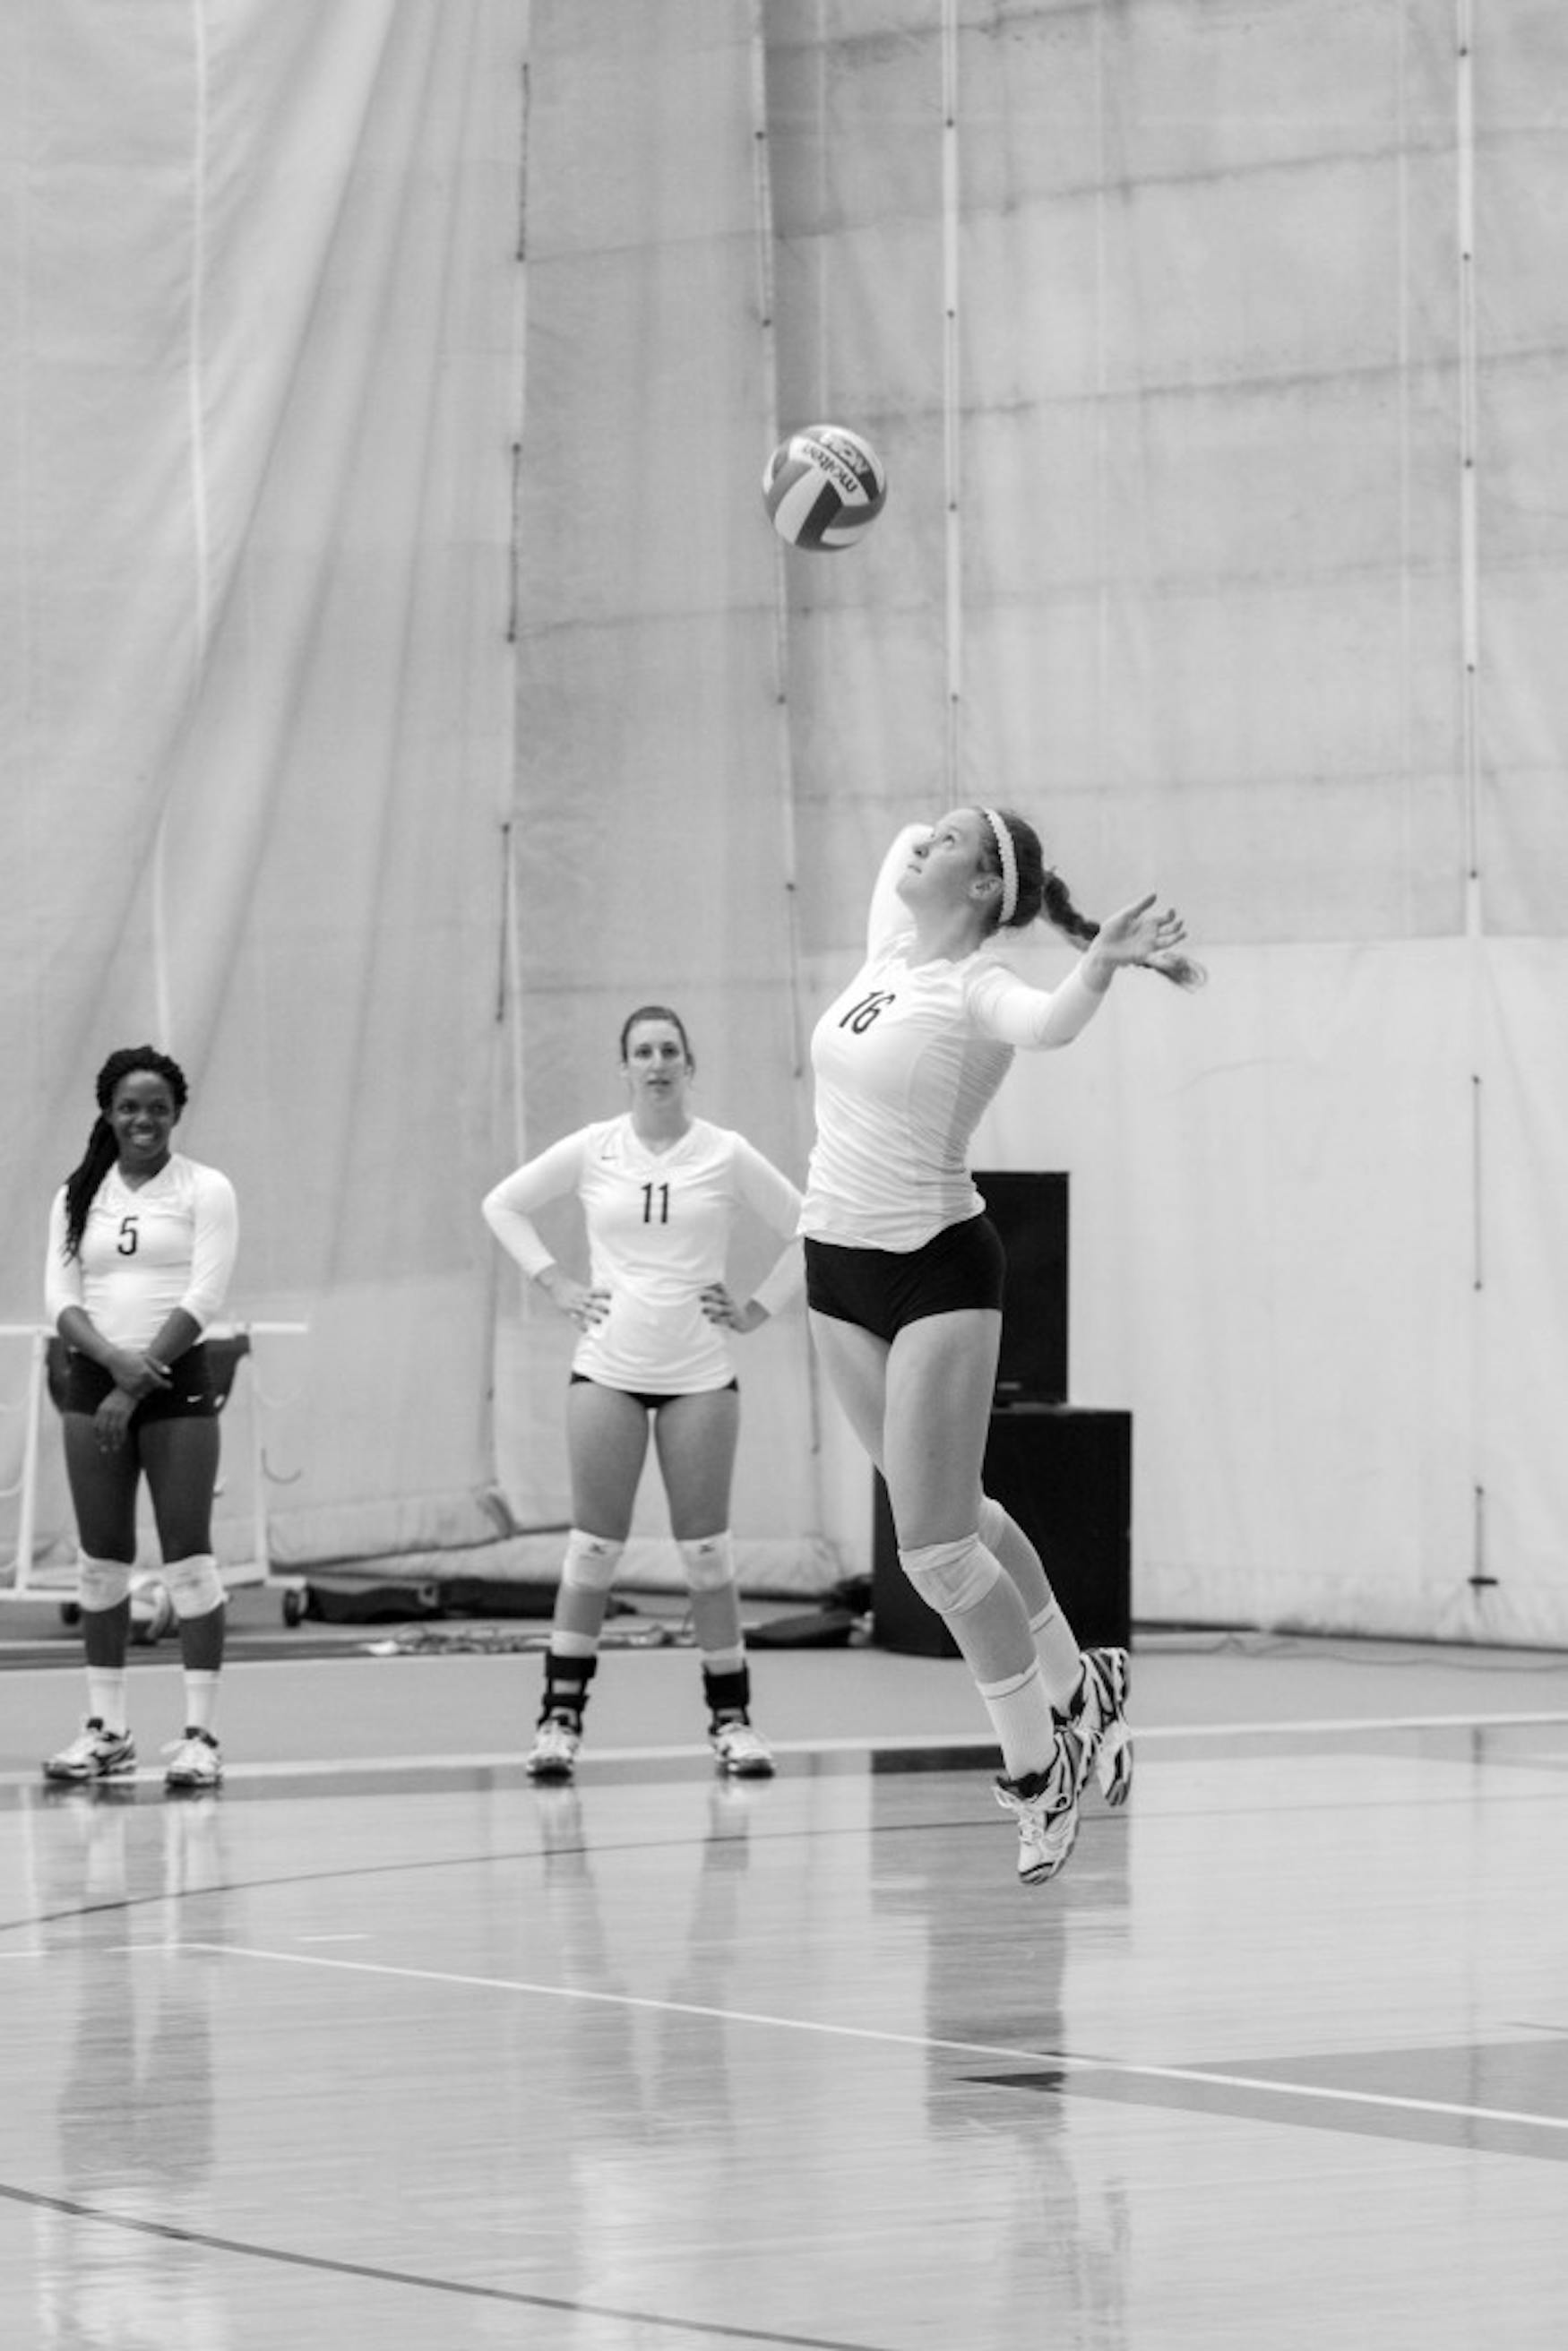 POWER HITTER: Setter Maggie Swenson ’16 (front) prepares a serve in a match against Colby College last September.